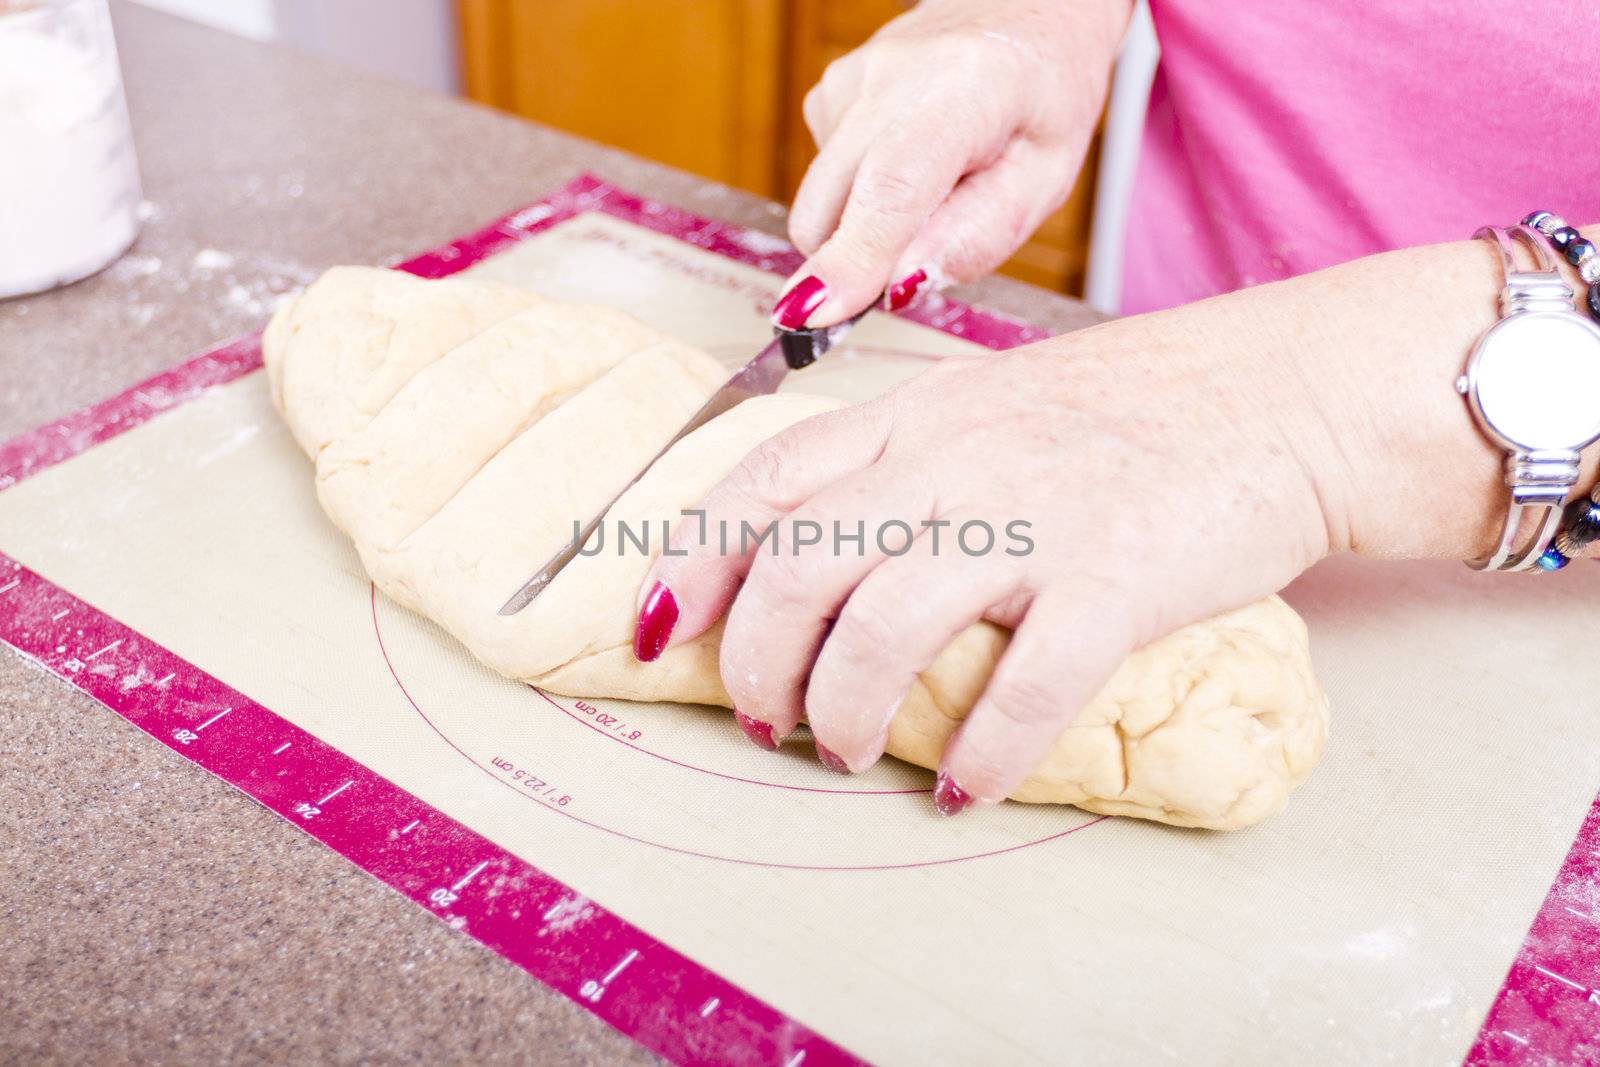 Cutting Turkish Pide pockets doughs.